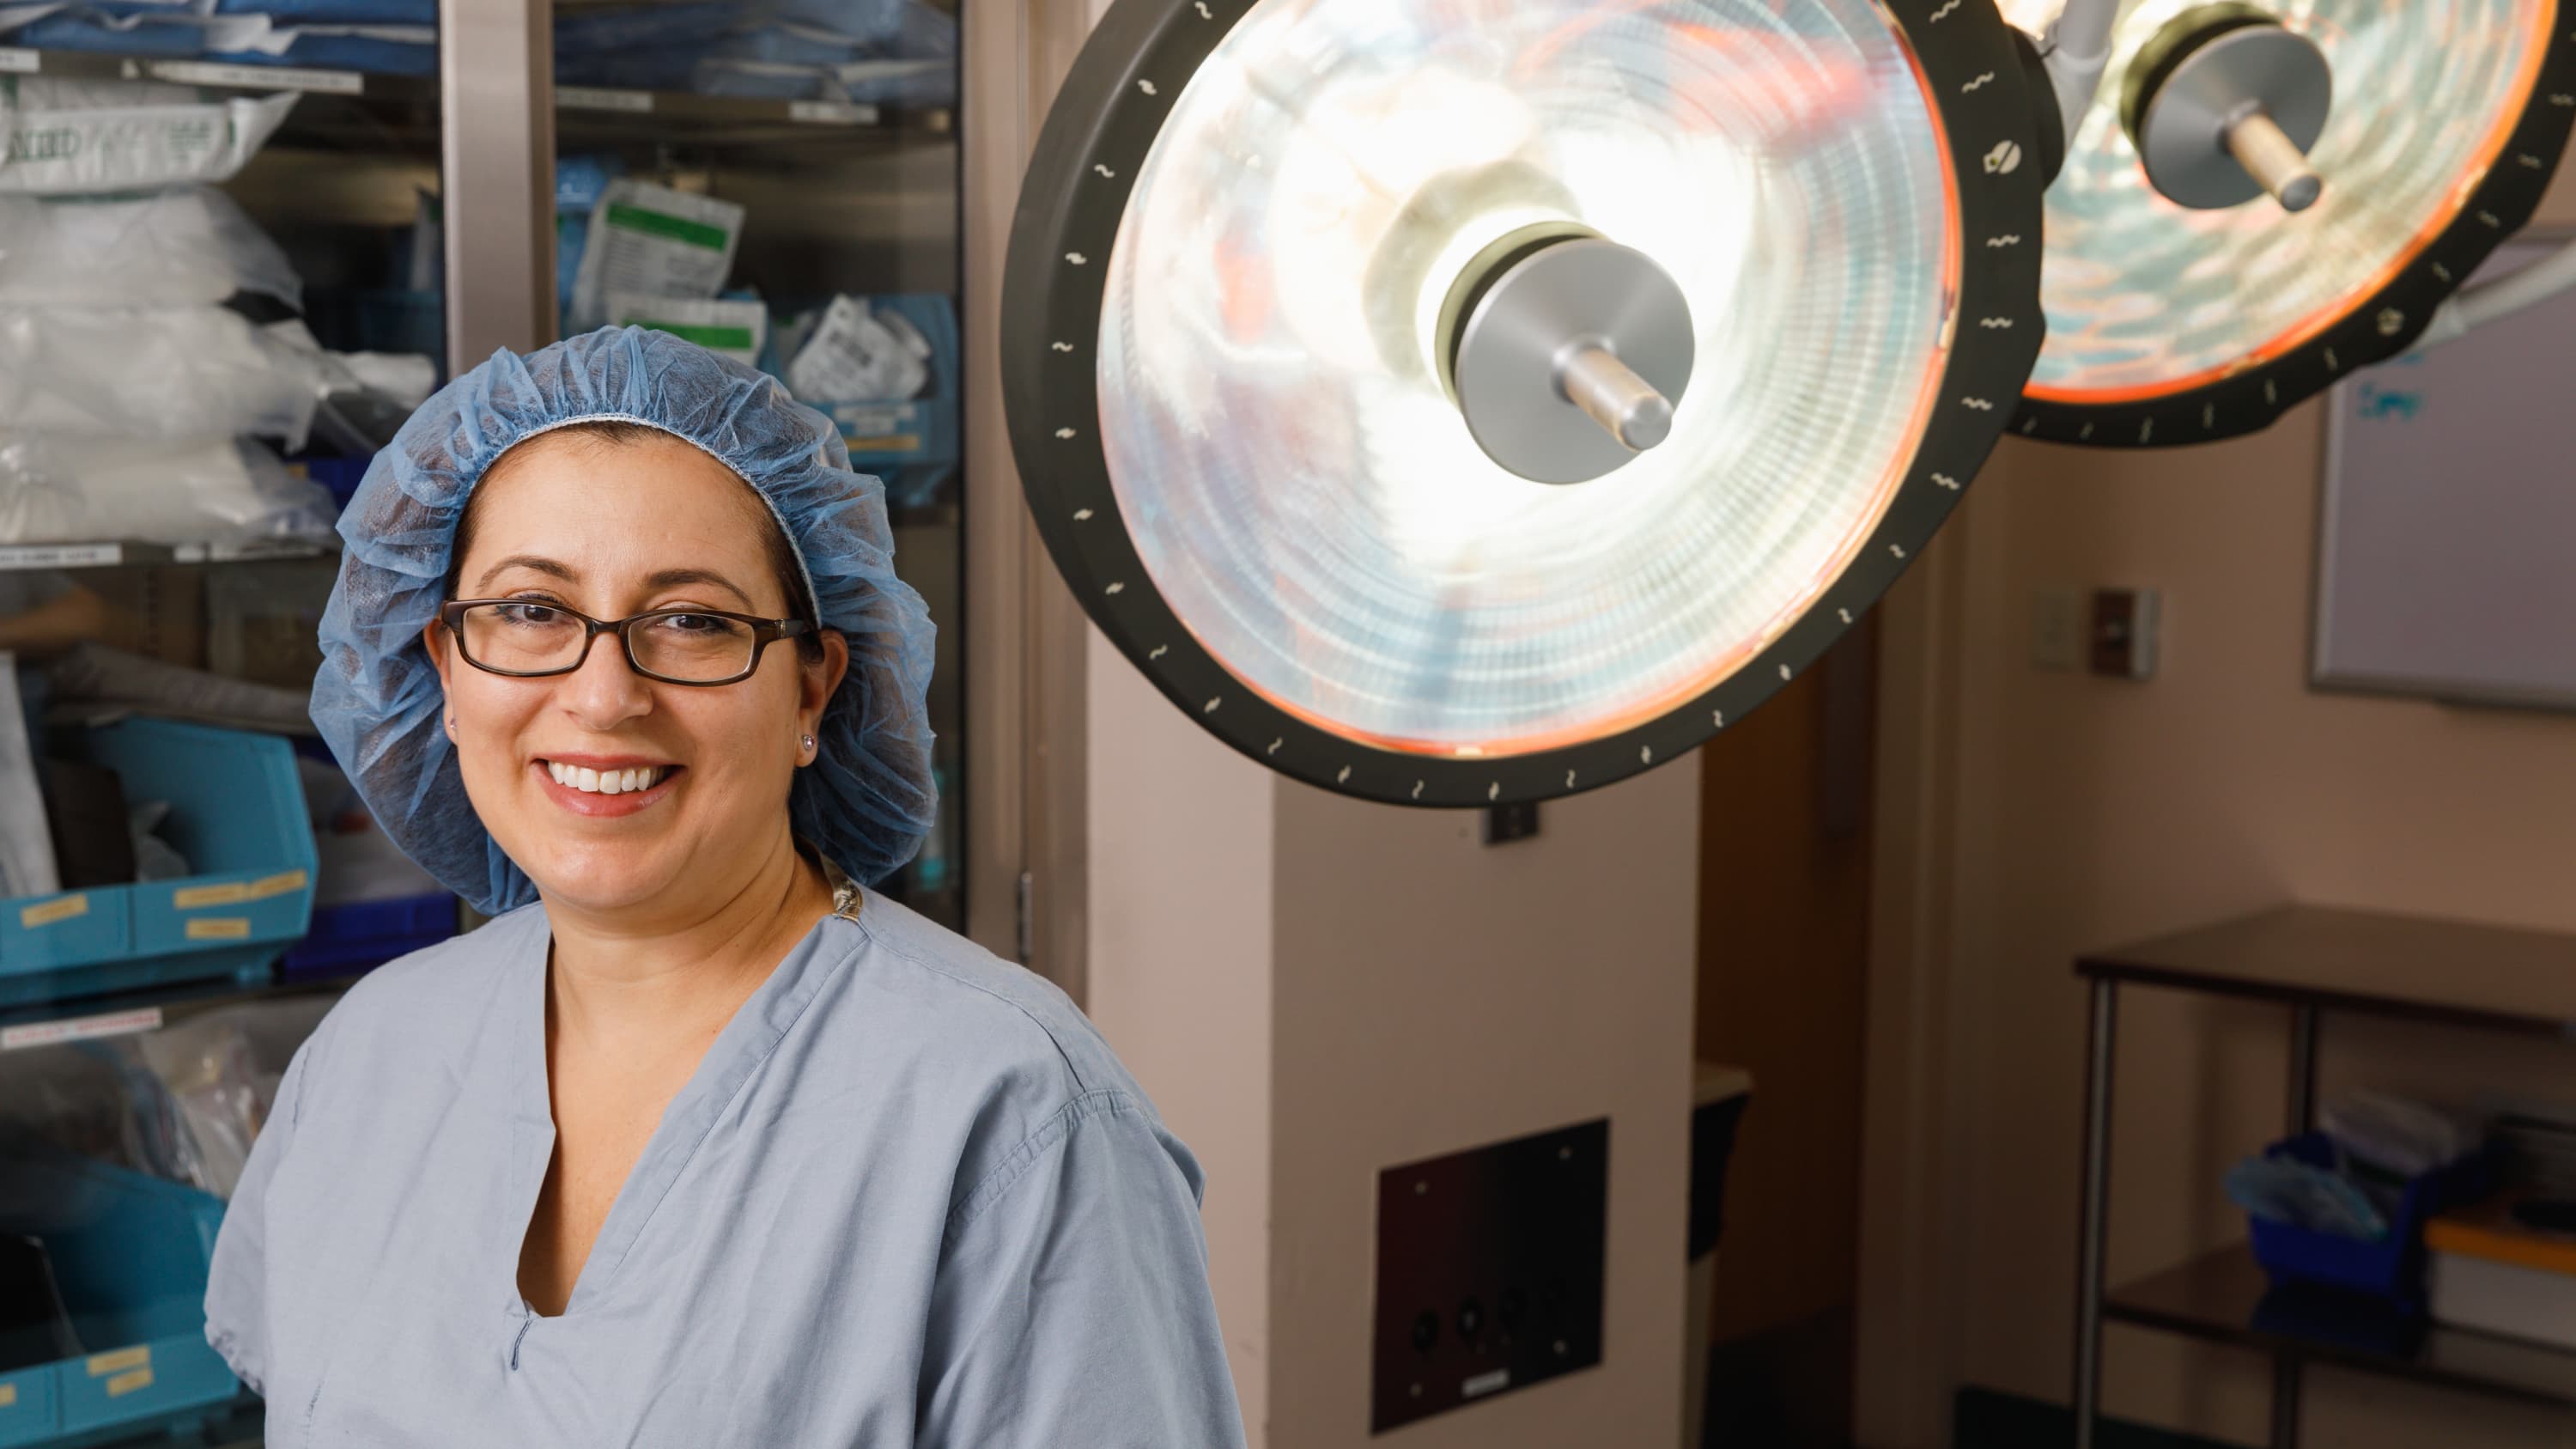 Dr. Pina Kodaman, a reproductive endocrinologist who uses minimally invasive surgical techniques to address fertility issues.